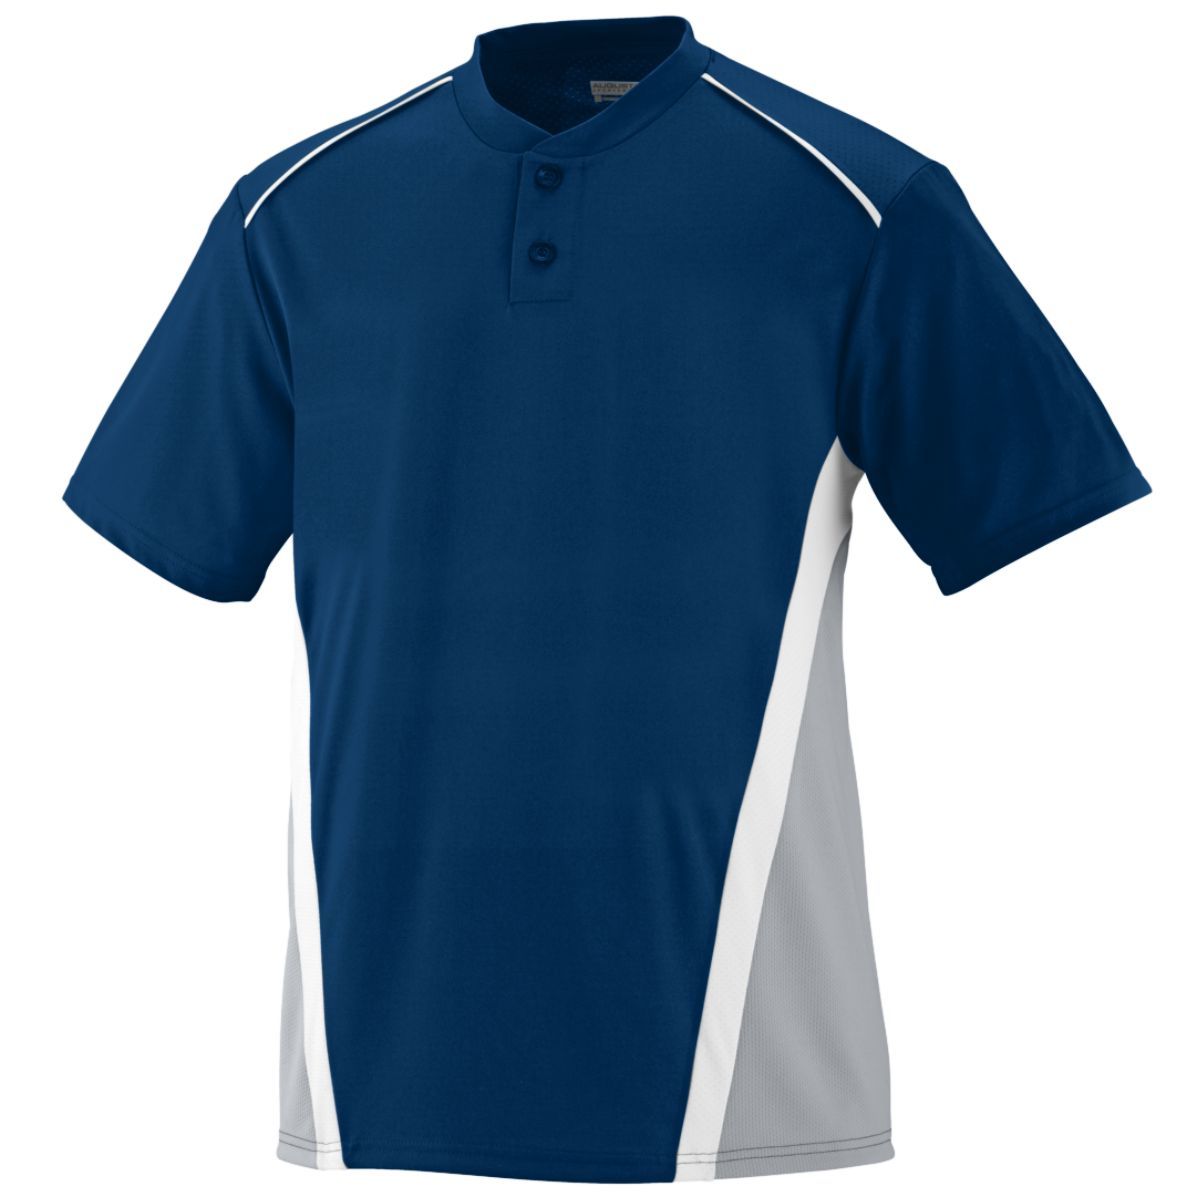 Augusta Sportswear Rbi Jersey in Navy/Silver Grey/White  -Part of the Adult, Adult-Jersey, Augusta-Products, Softball, Shirts product lines at KanaleyCreations.com